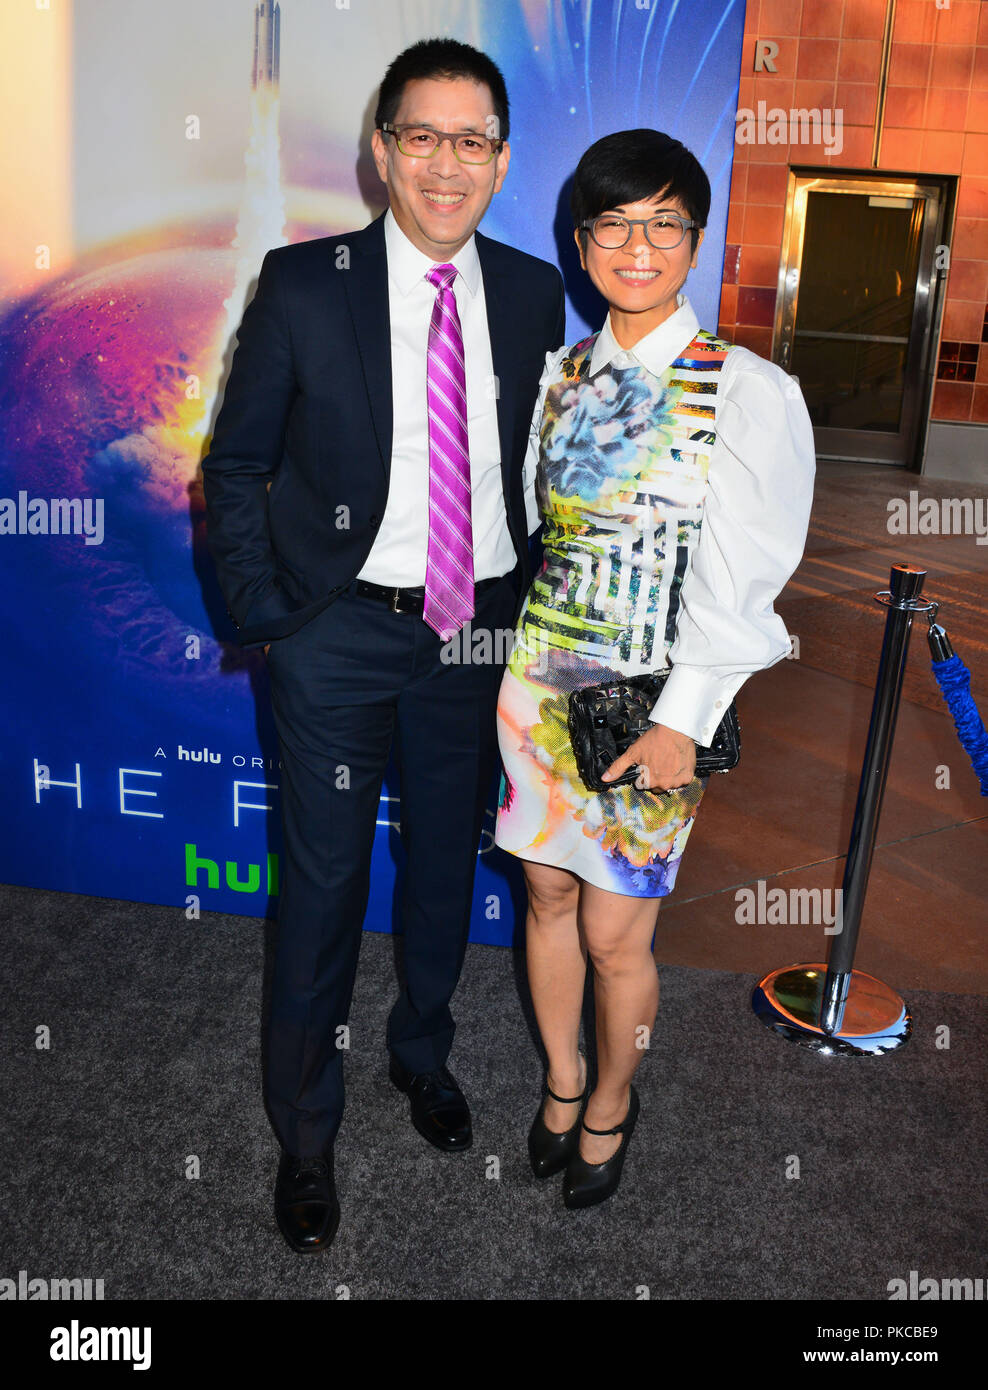 Los Angeles, USA. 12th Sep 2018. Scott Takeda, Keiko Agena 018 attends the premiere of Hulu's 'The First' on September 12, 2018 in Los Angeles, CaliforniaScott Takeda, Keiko Agena 018 attends the premiere of Hulu's 'The First' on September 12, 2018 in Los Angeles, California Credit: Tsuni / USA/Alamy Live News Stock Photo